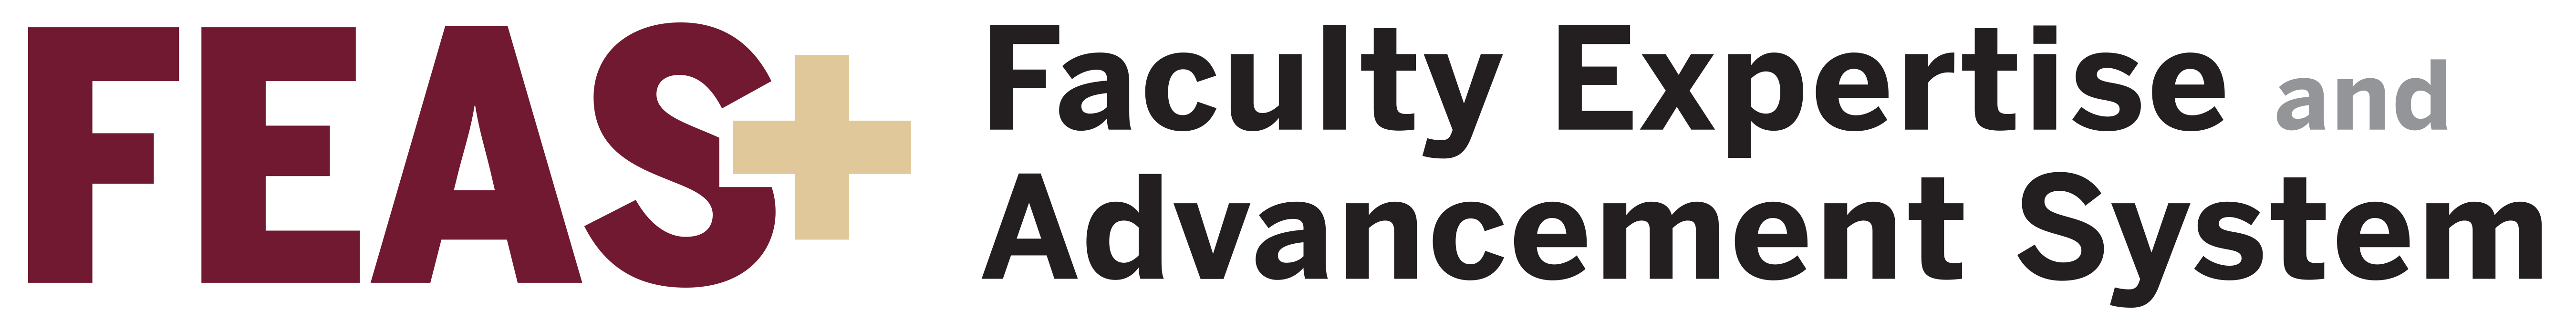 Faculty Expertise and Advancement System Logo